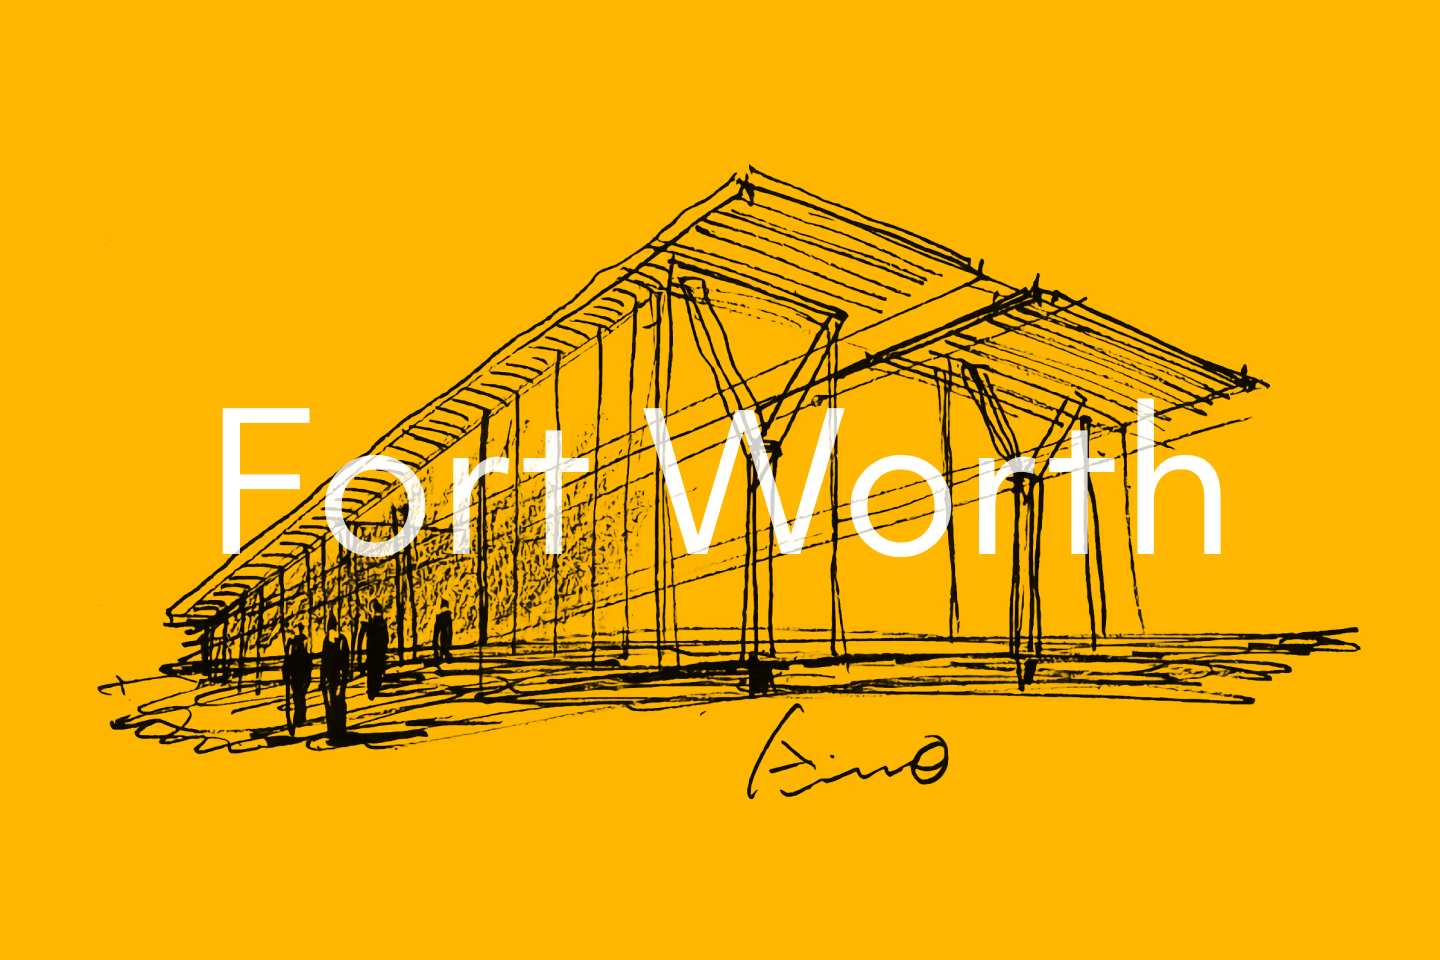 Fort Worth’s world-renowned art and architecture